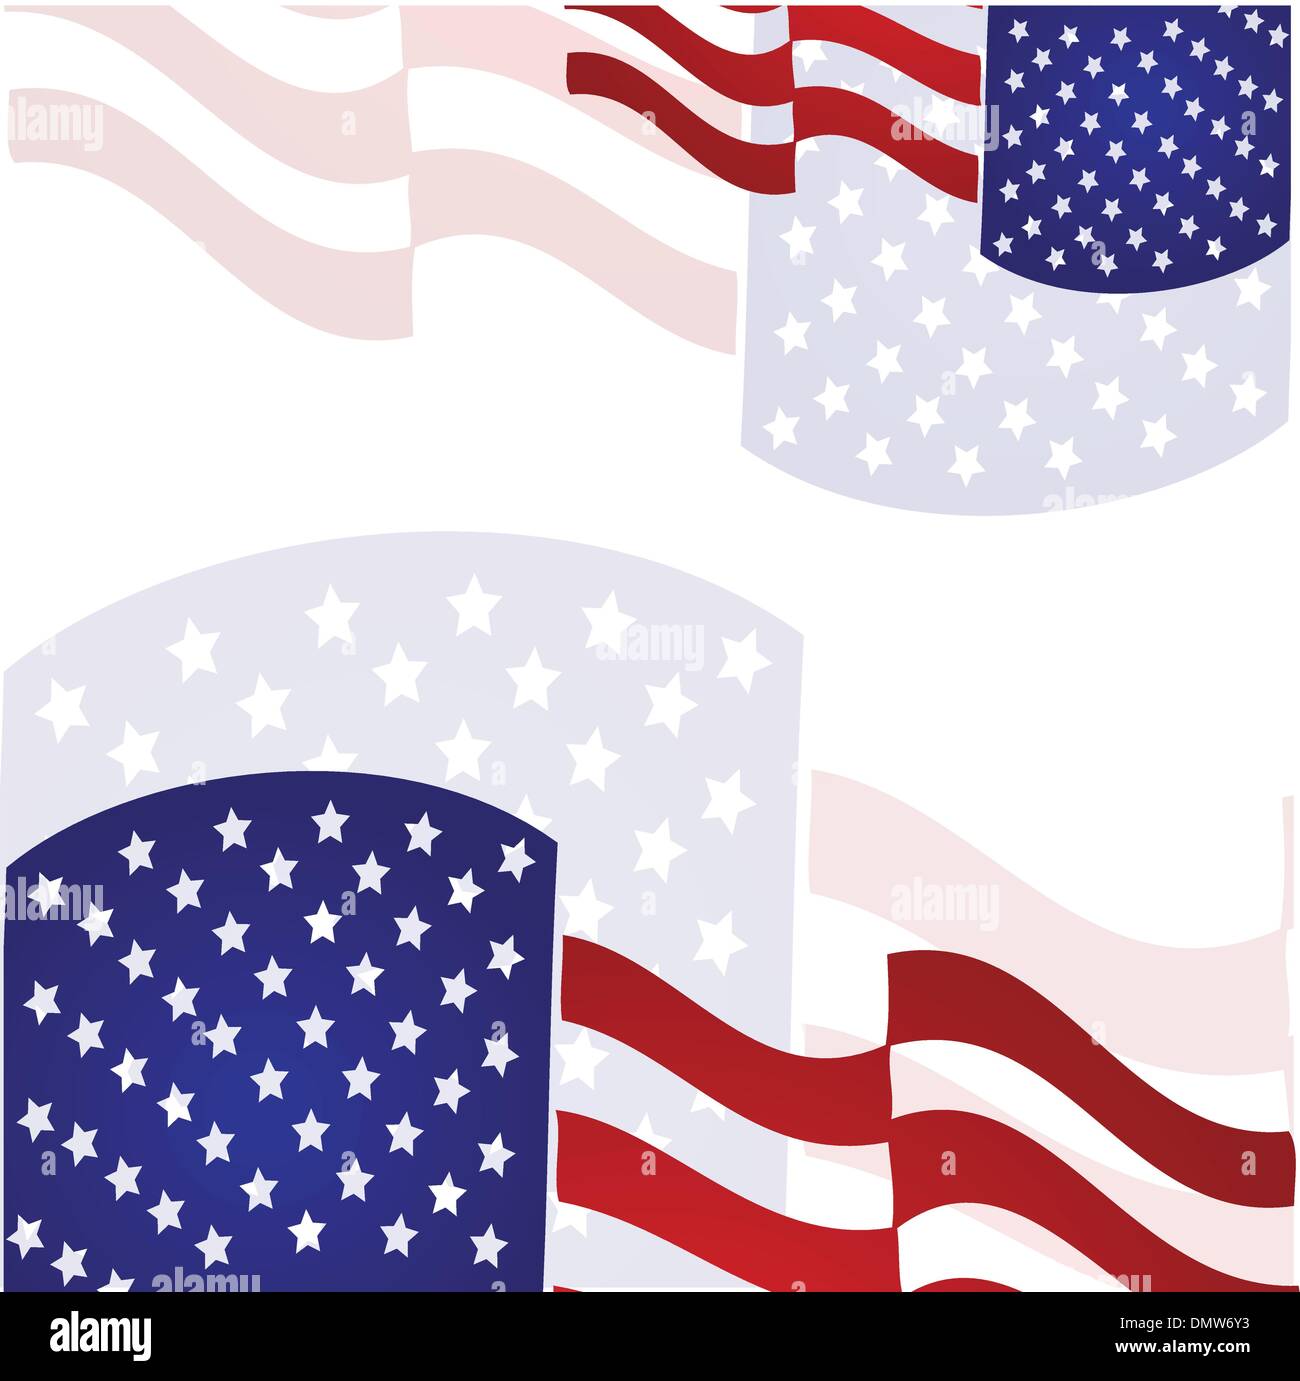 America usa stars and stripes flag stylized Vector Image